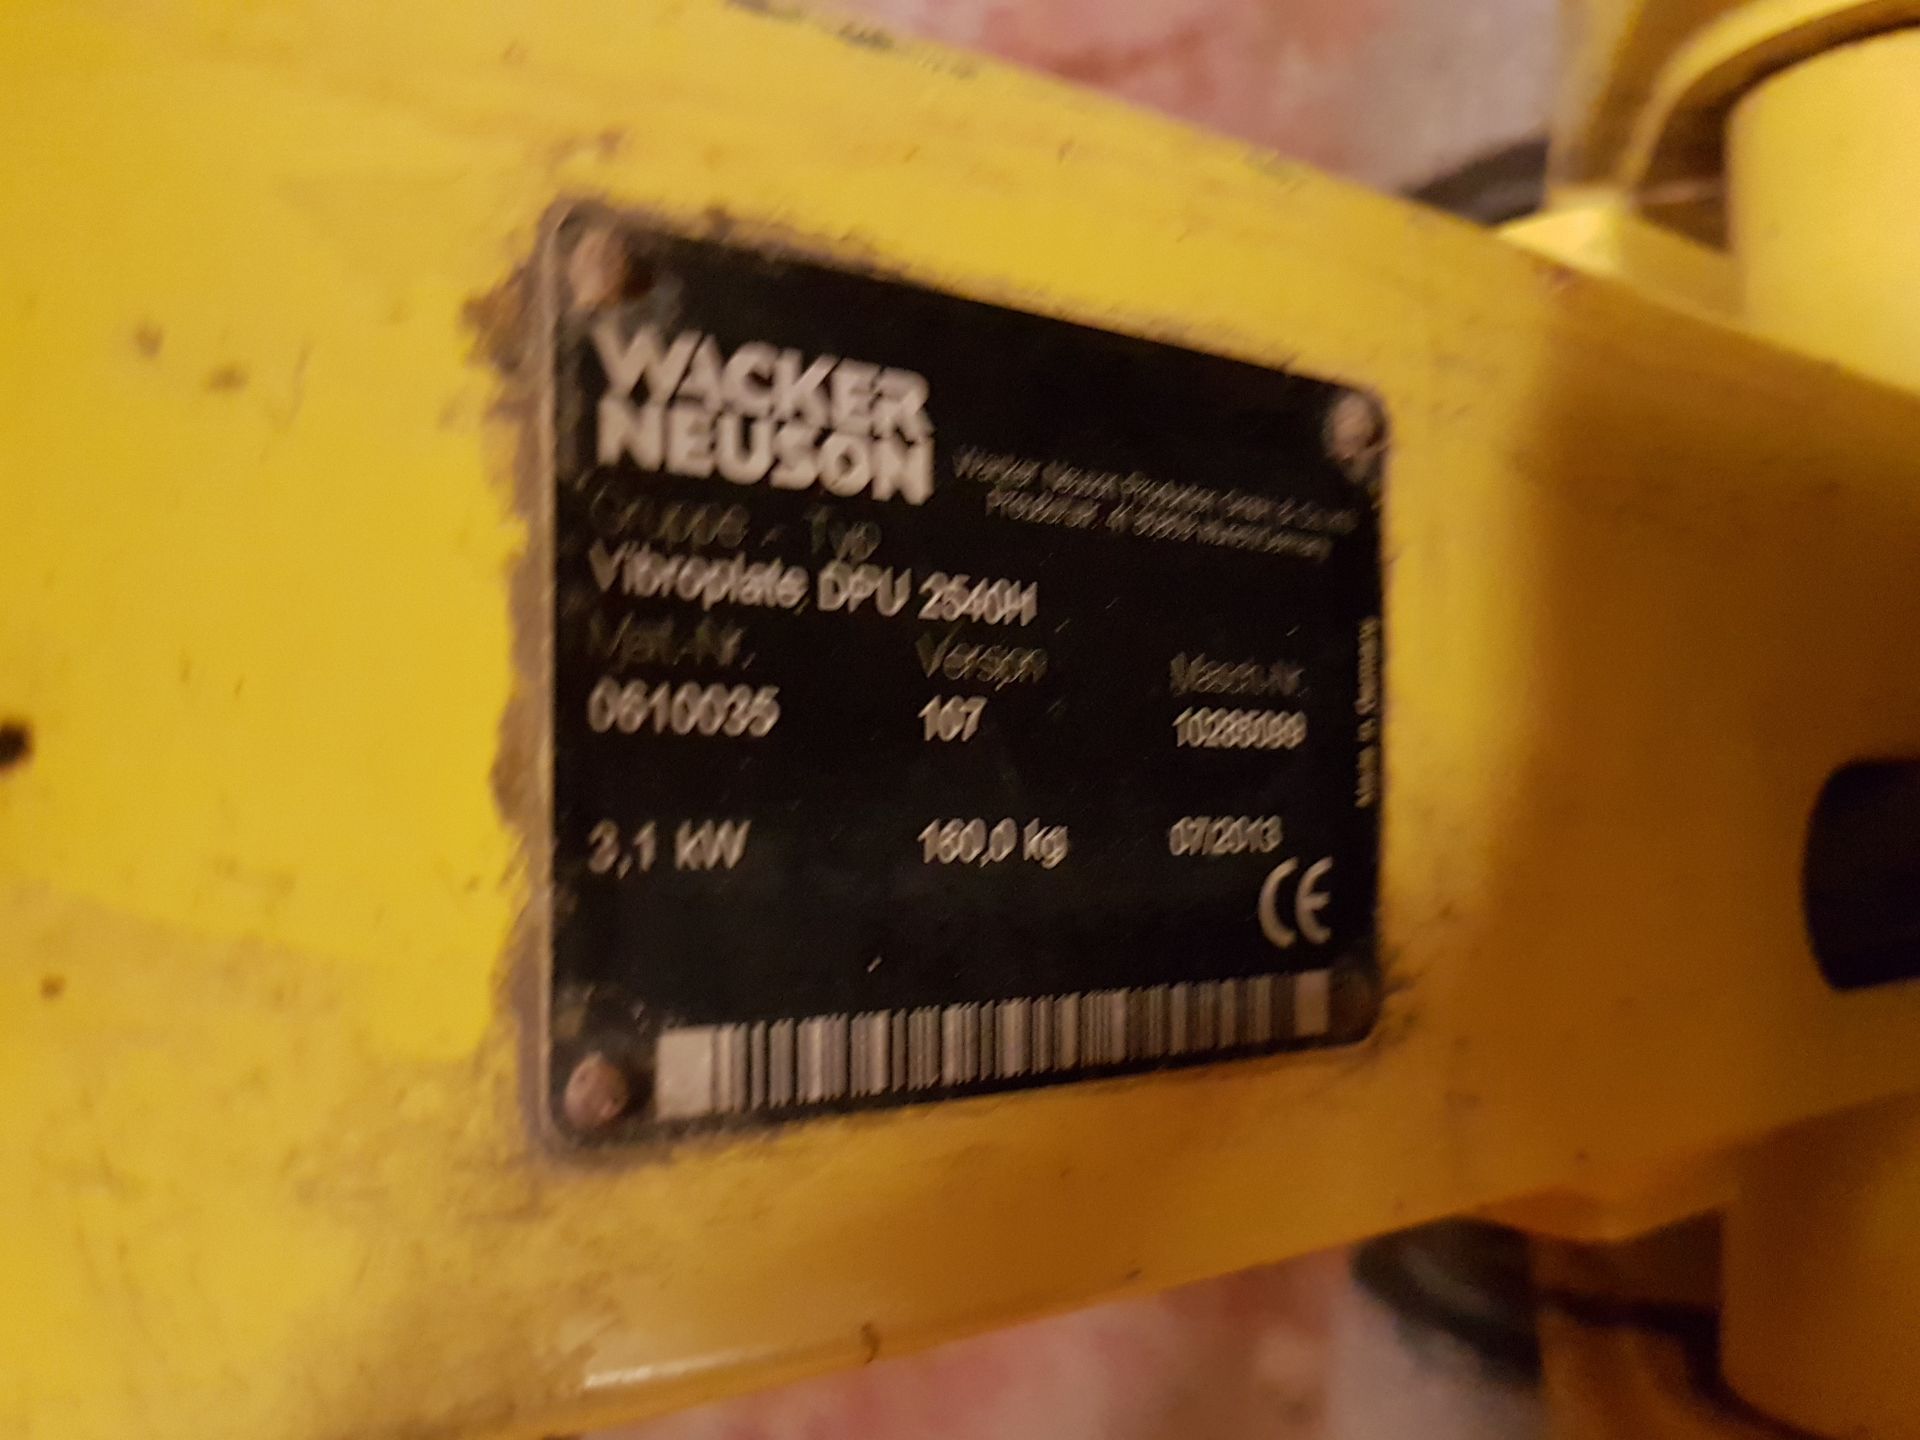 Wacker Neuson Diesel Forward / Reverse Compaction Plate - Tested / In Working Order - Image 2 of 2